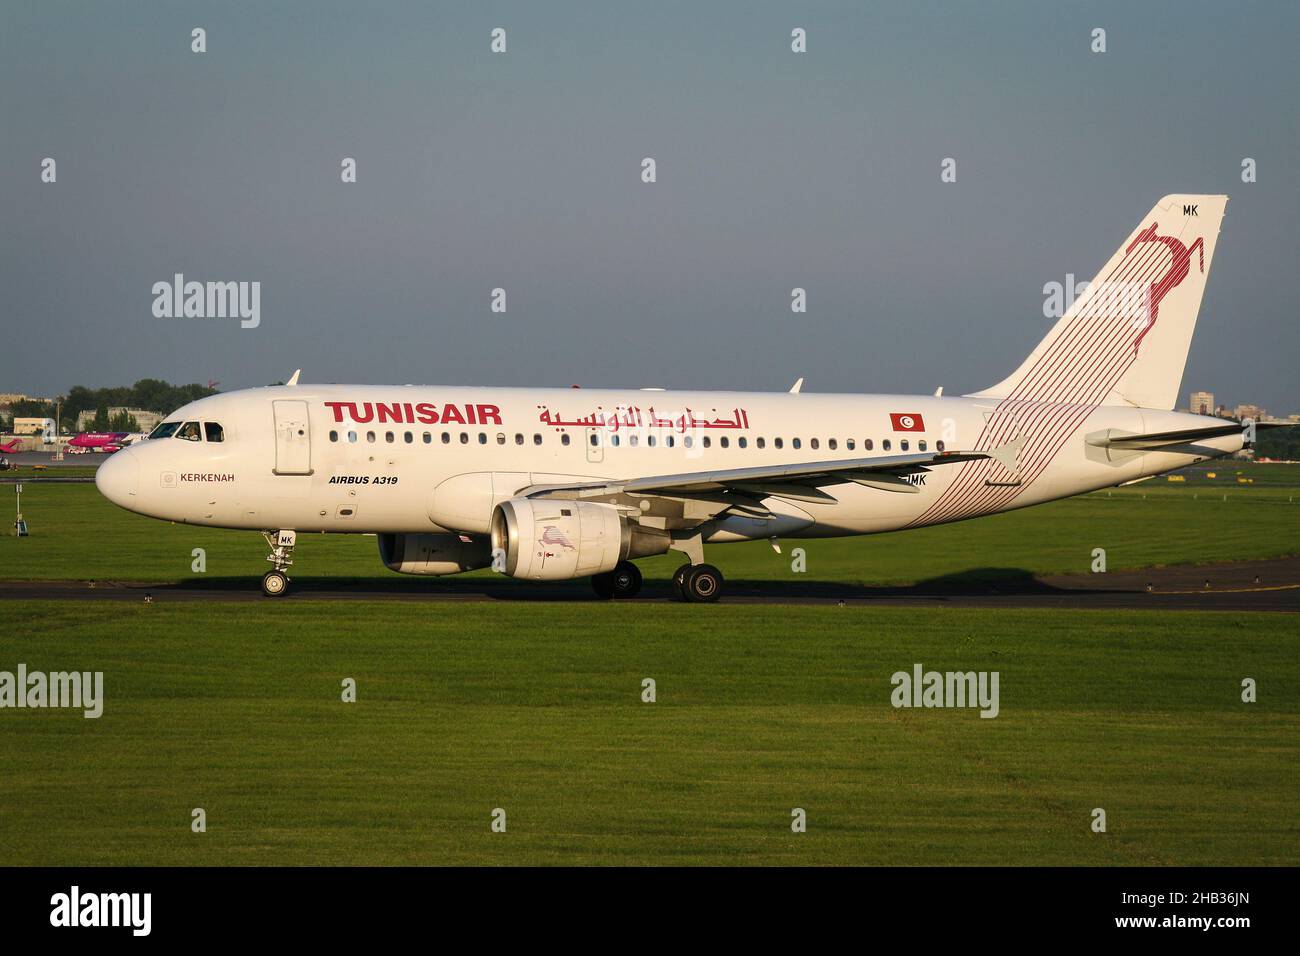 Warsaw, Poland - 07 august 2008: Side view of tunisian airlines Tunisair jet airplane Airbus A319 taxiing on taxiway to the runway Stock Photo